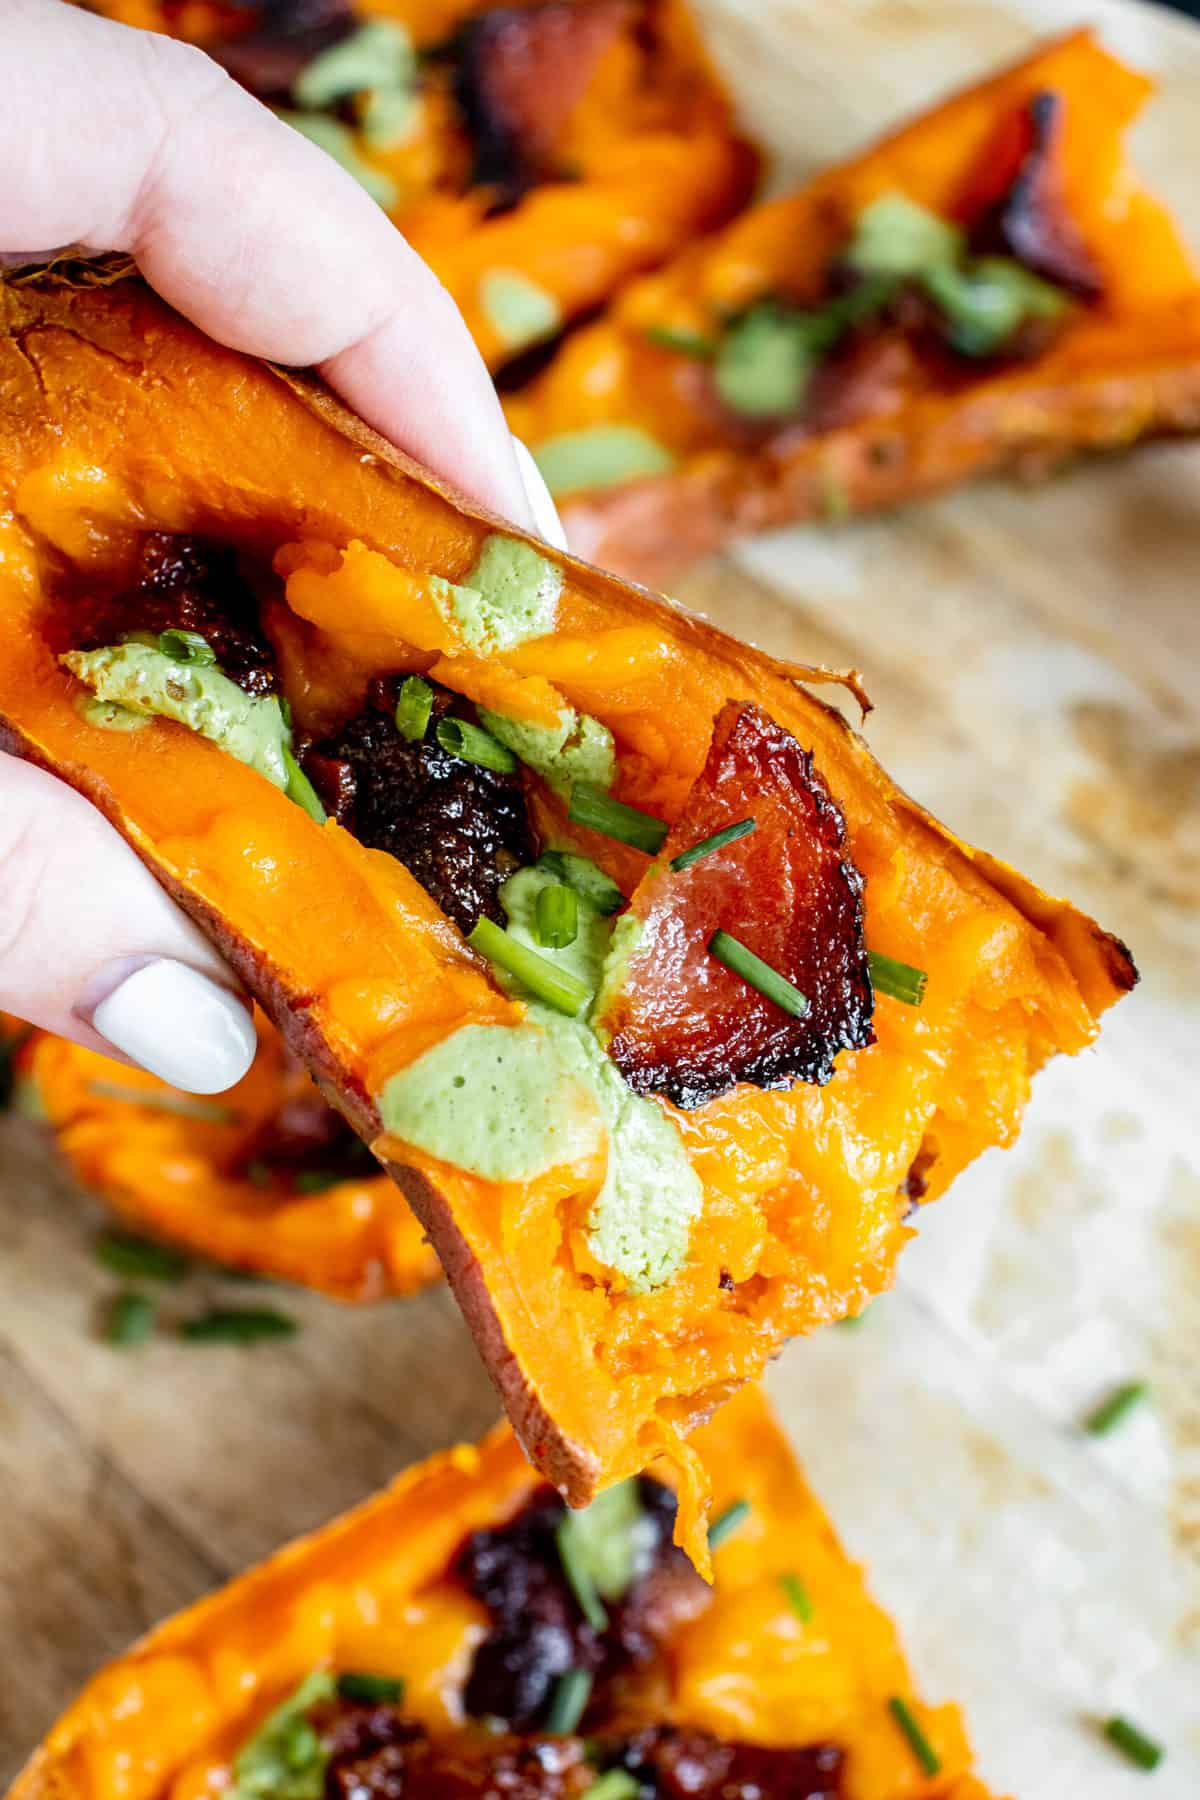 Sweet Potato Skins With Candied Bacon and a Spicy Basil Cream Sauce